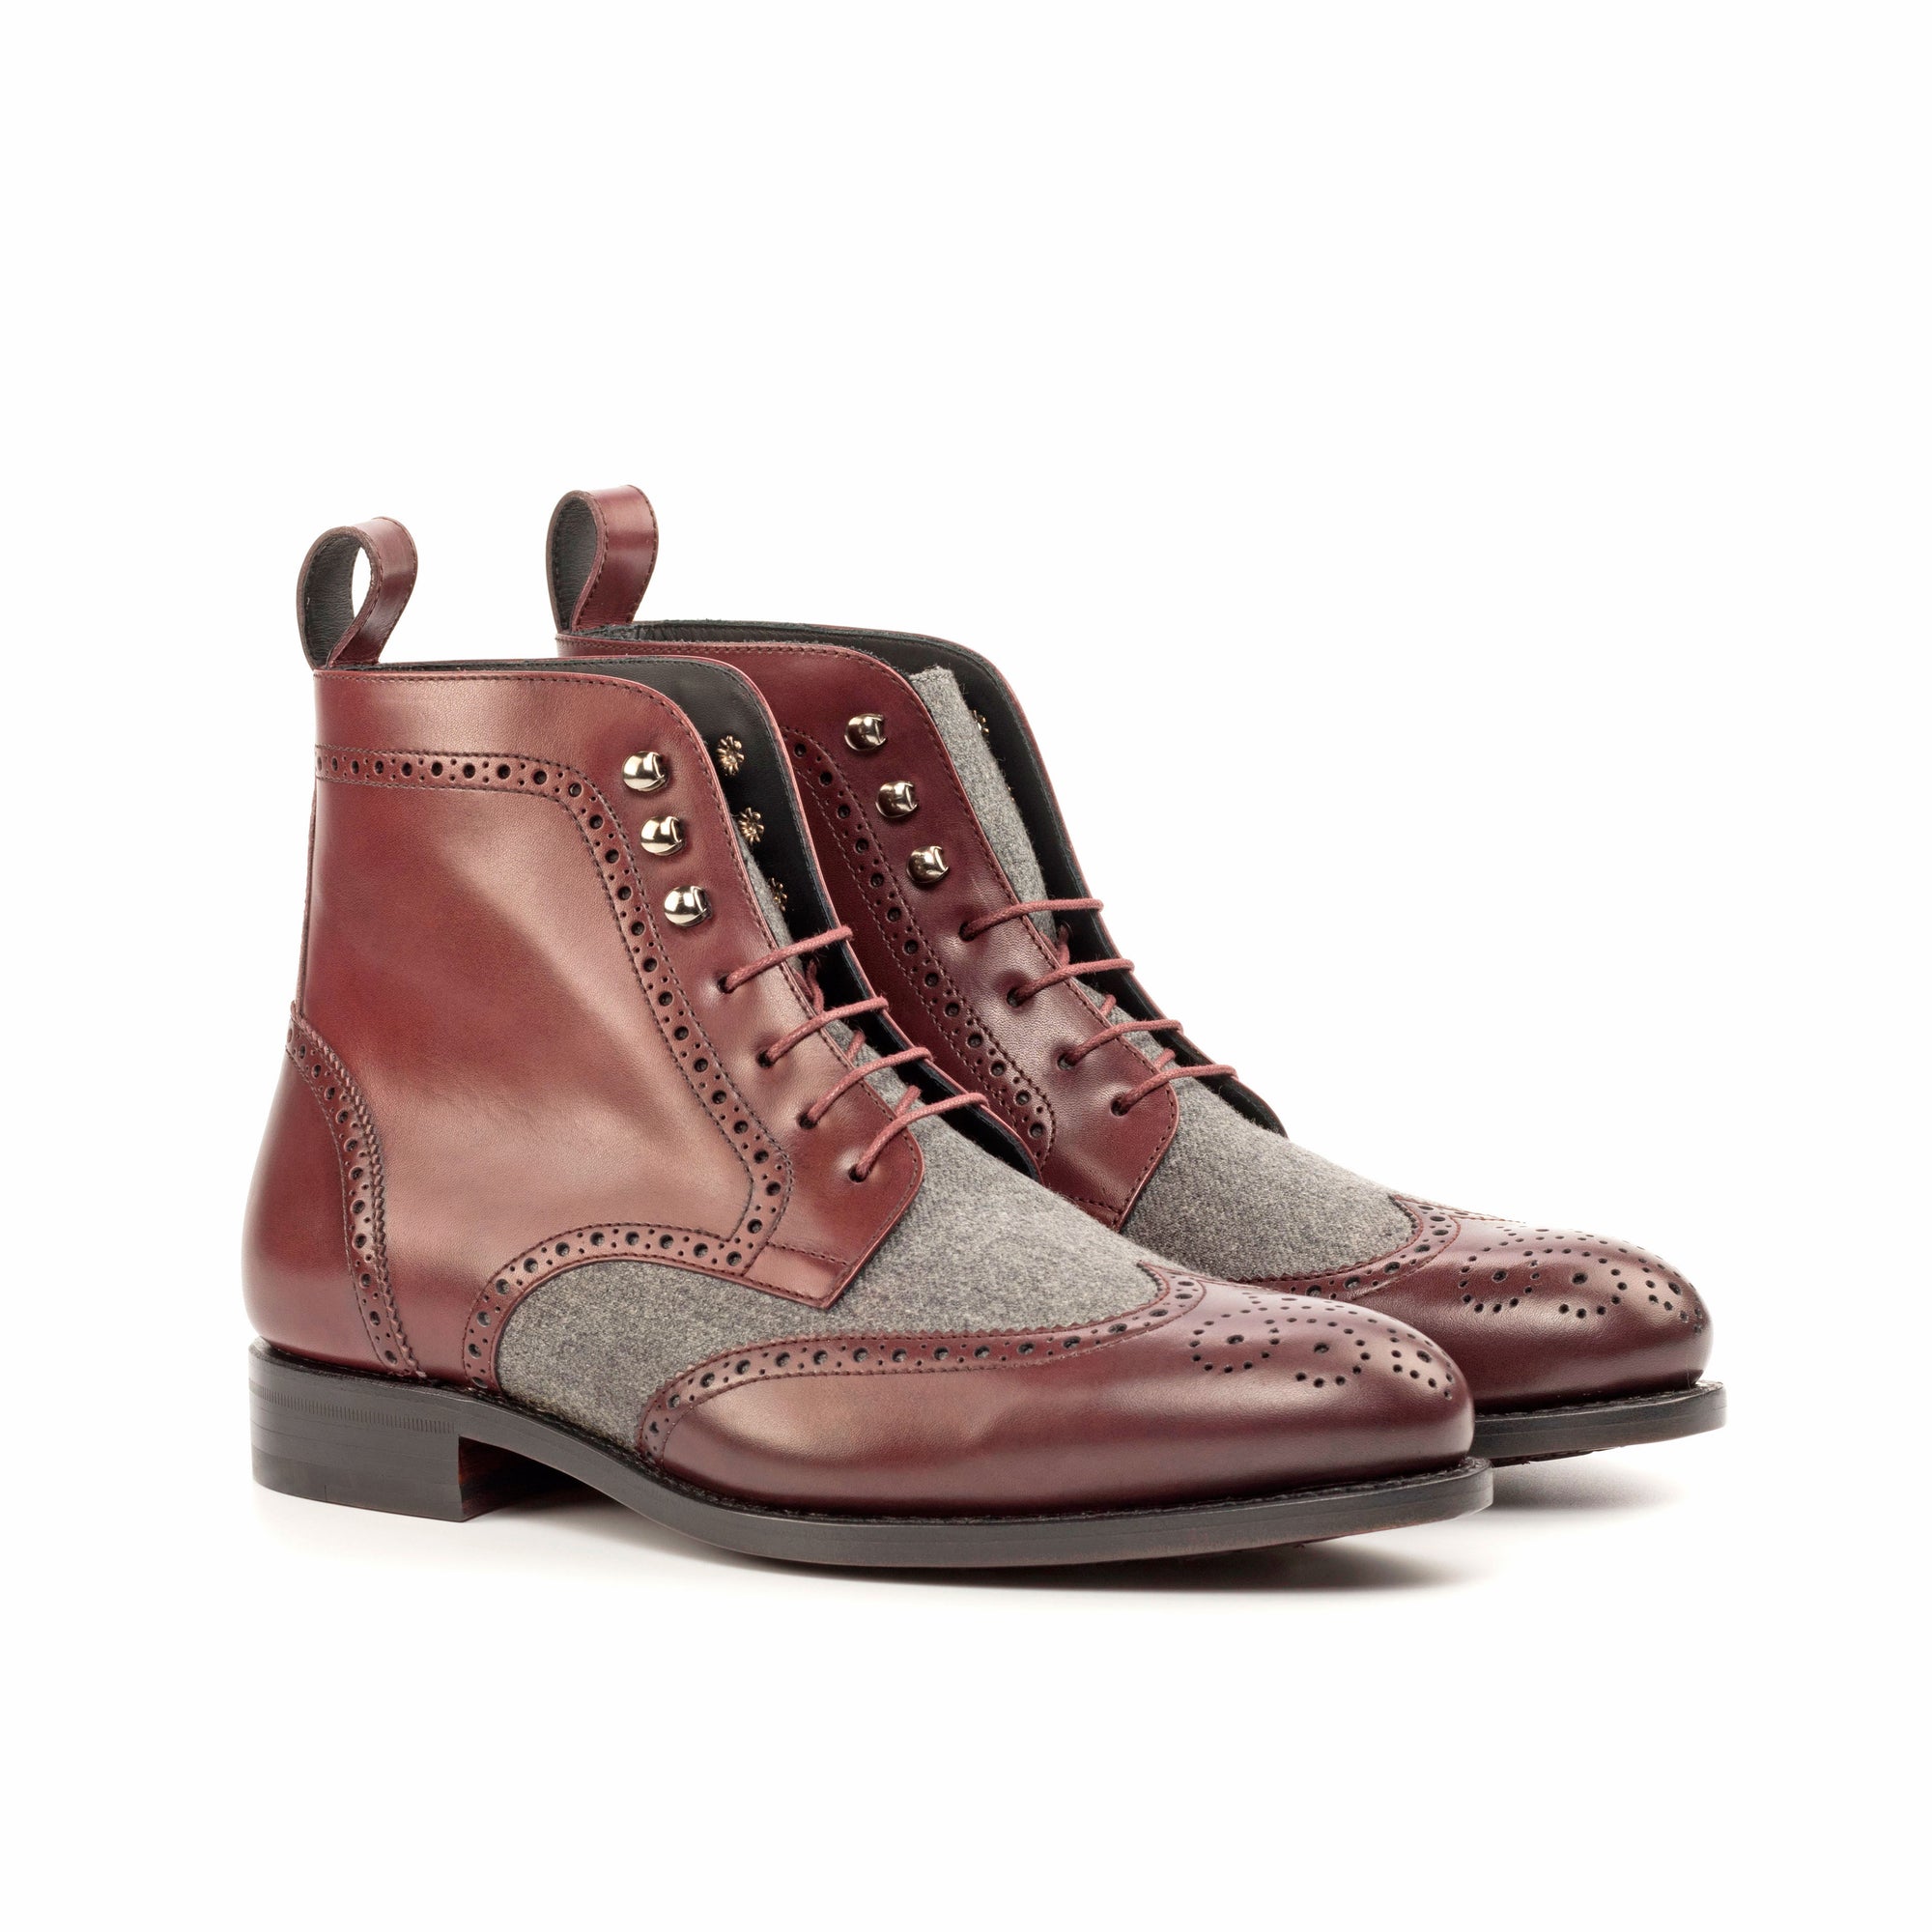 Highland Military Brogue, Goodyear Welted Shoes, Custom Leather Boots